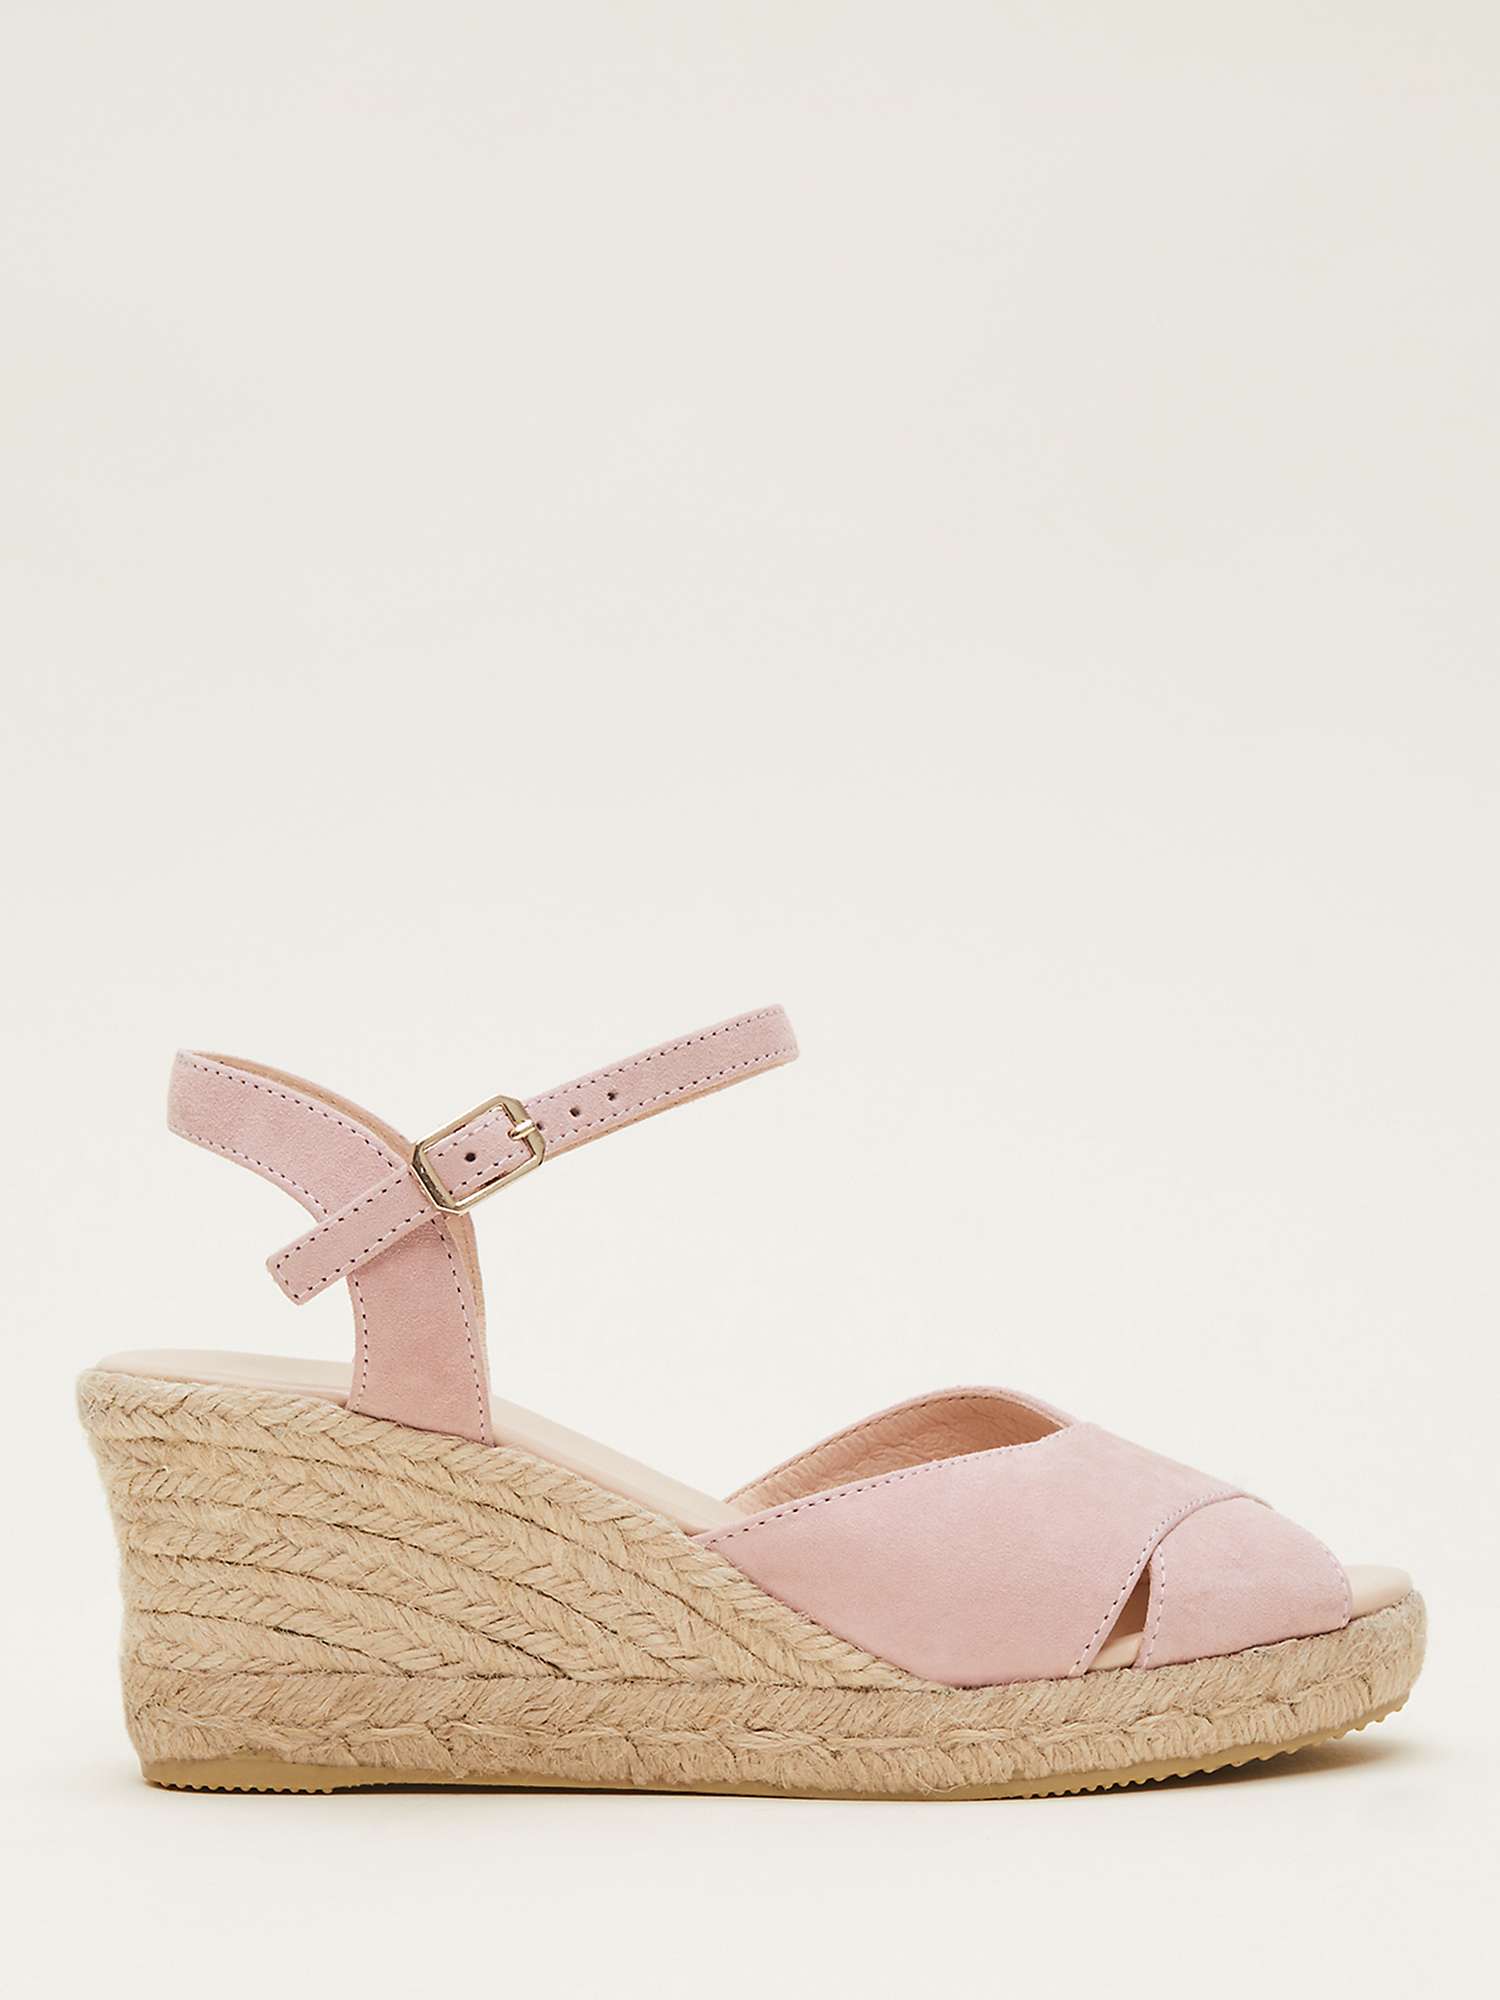 Buy Phase Eight Suede Espadrilles, Light Pink Online at johnlewis.com